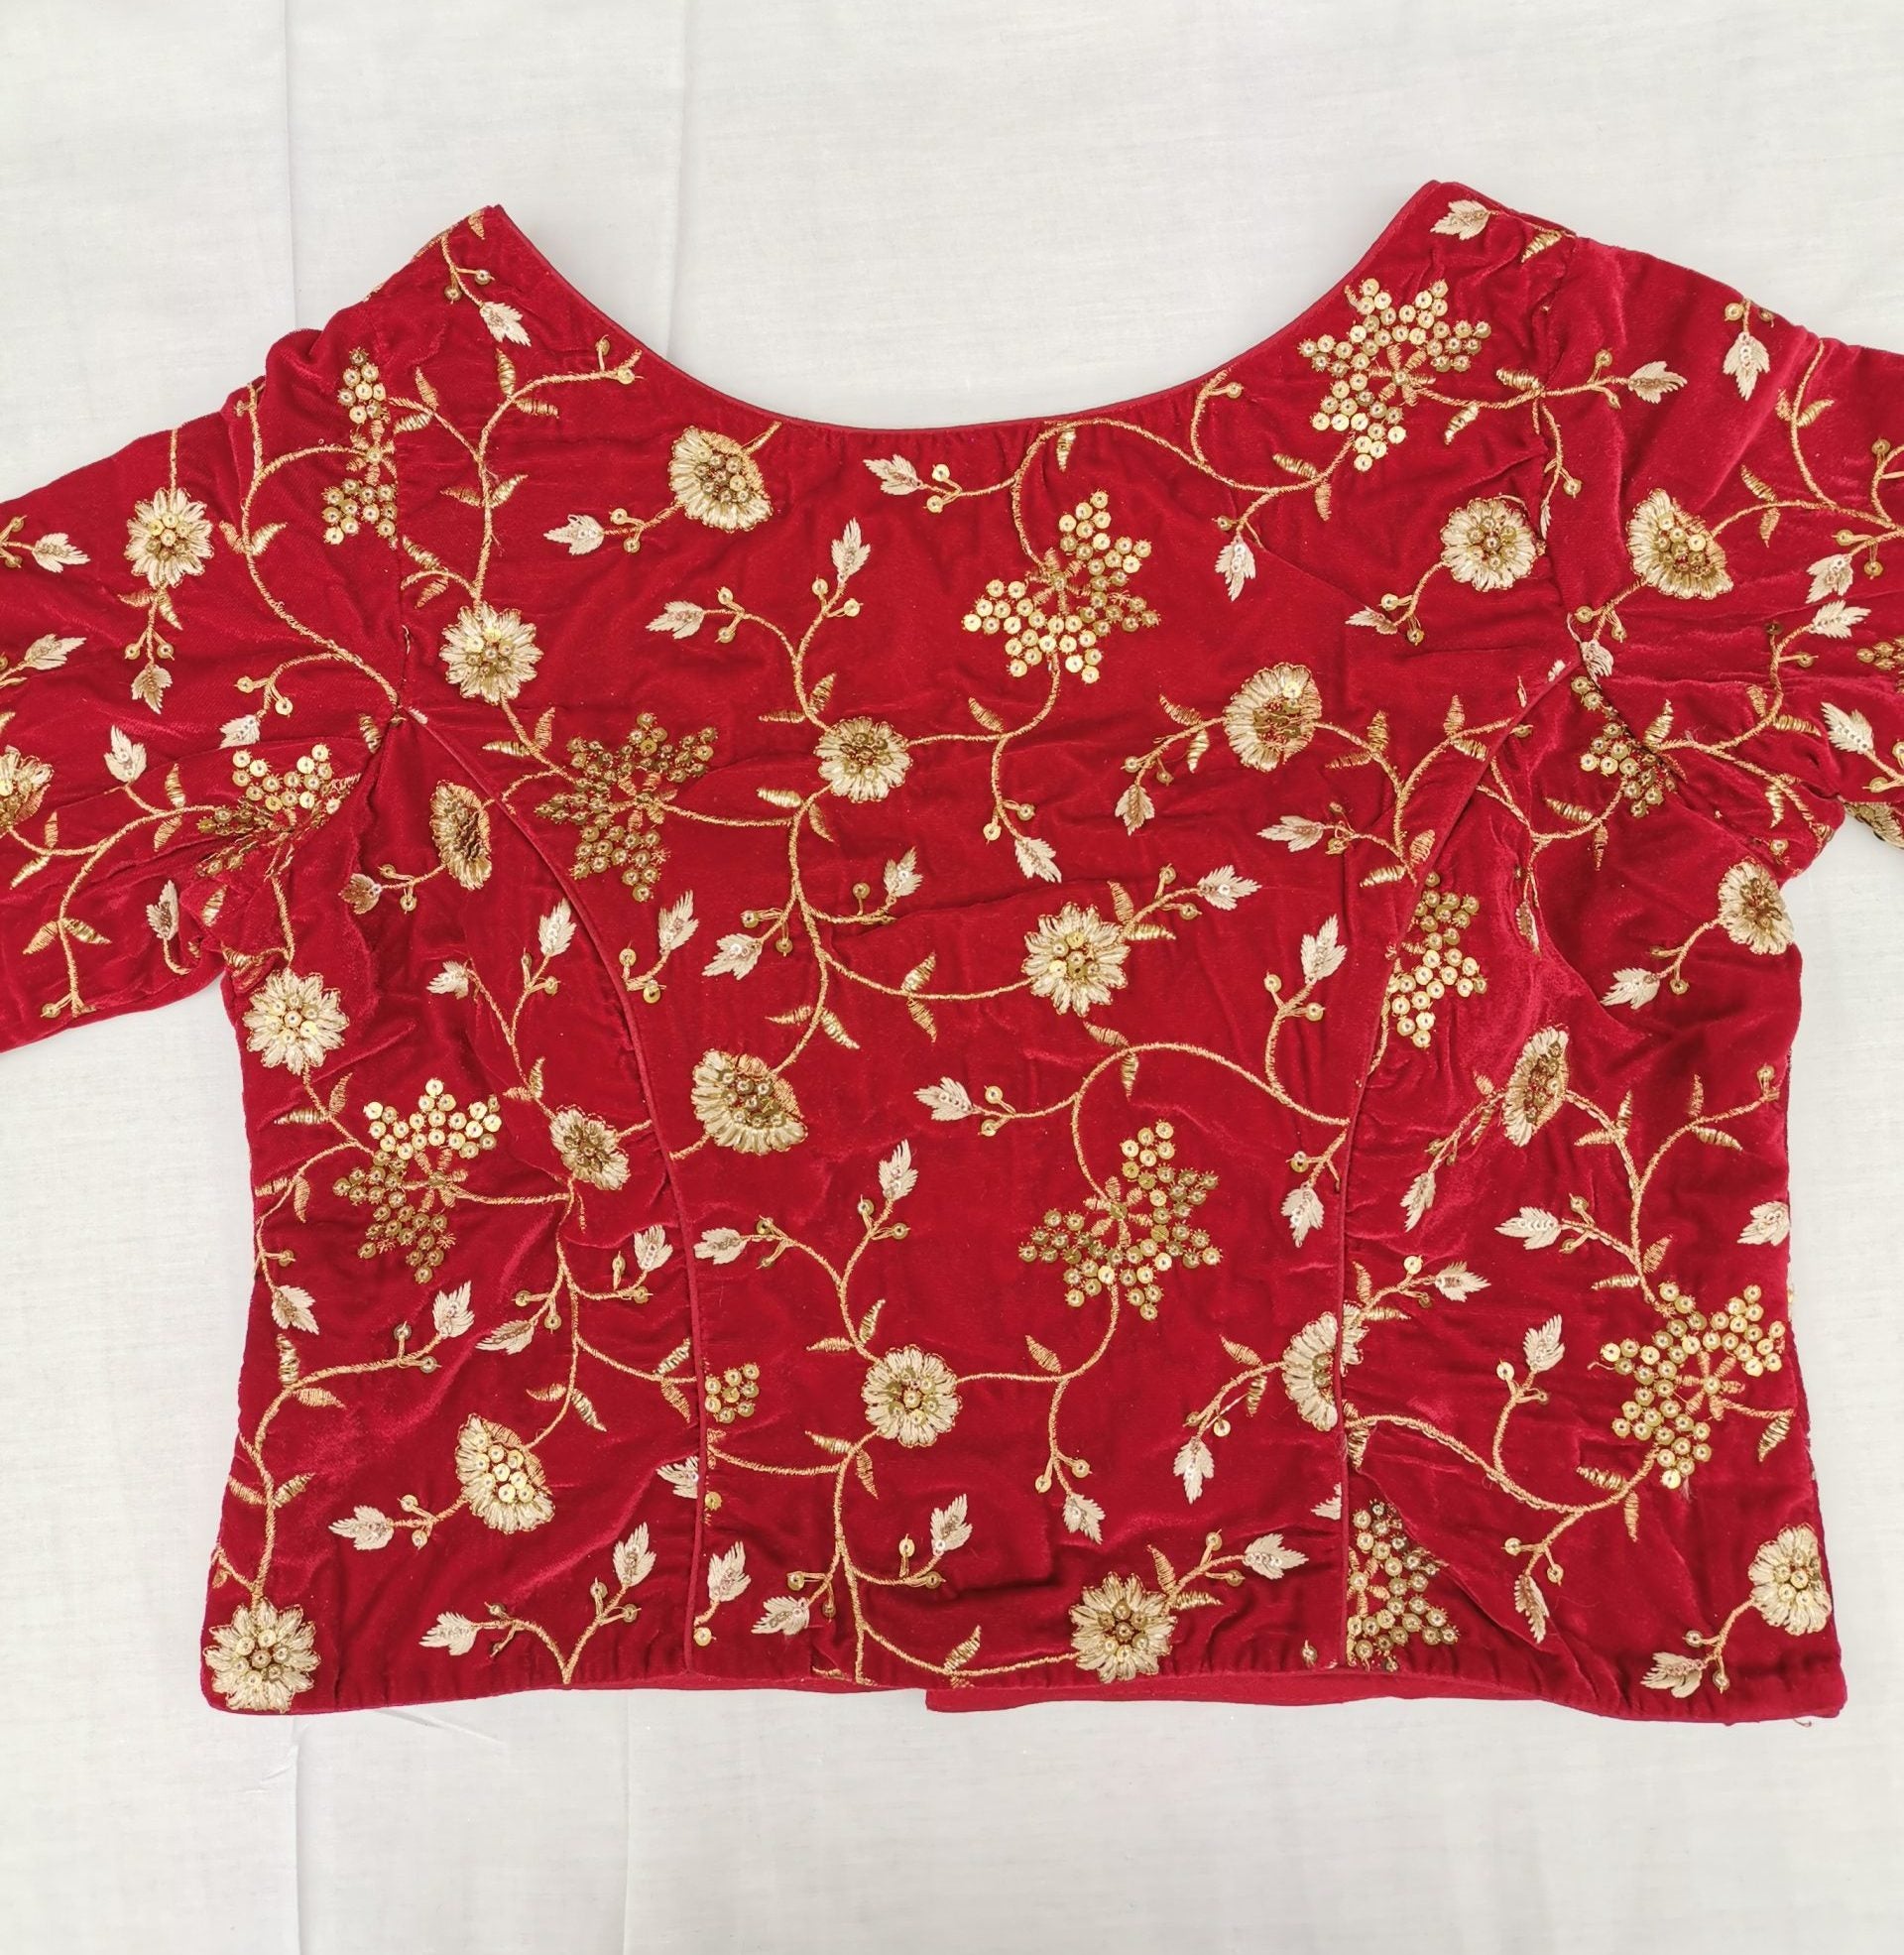 Darbari Embroidered Handmade Design Red Golden Embroidered Blouse